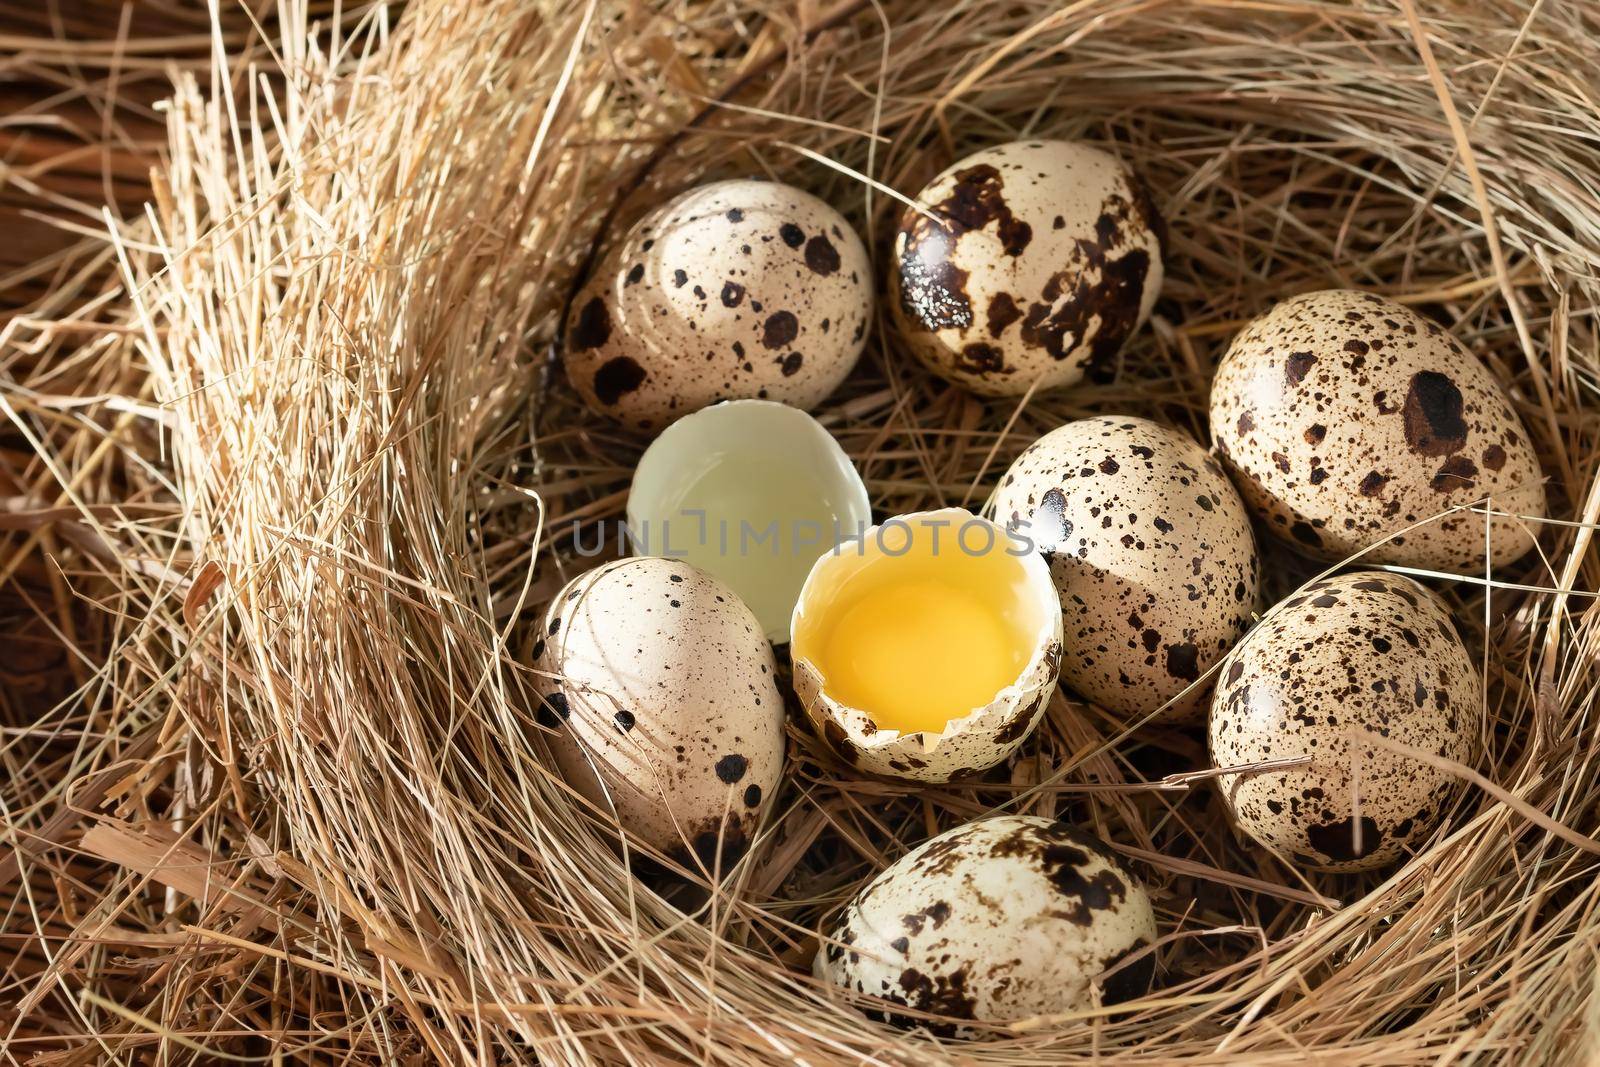 Several quail eggs in a decorative nest made of straw on a wooden table close-up, flatlay.